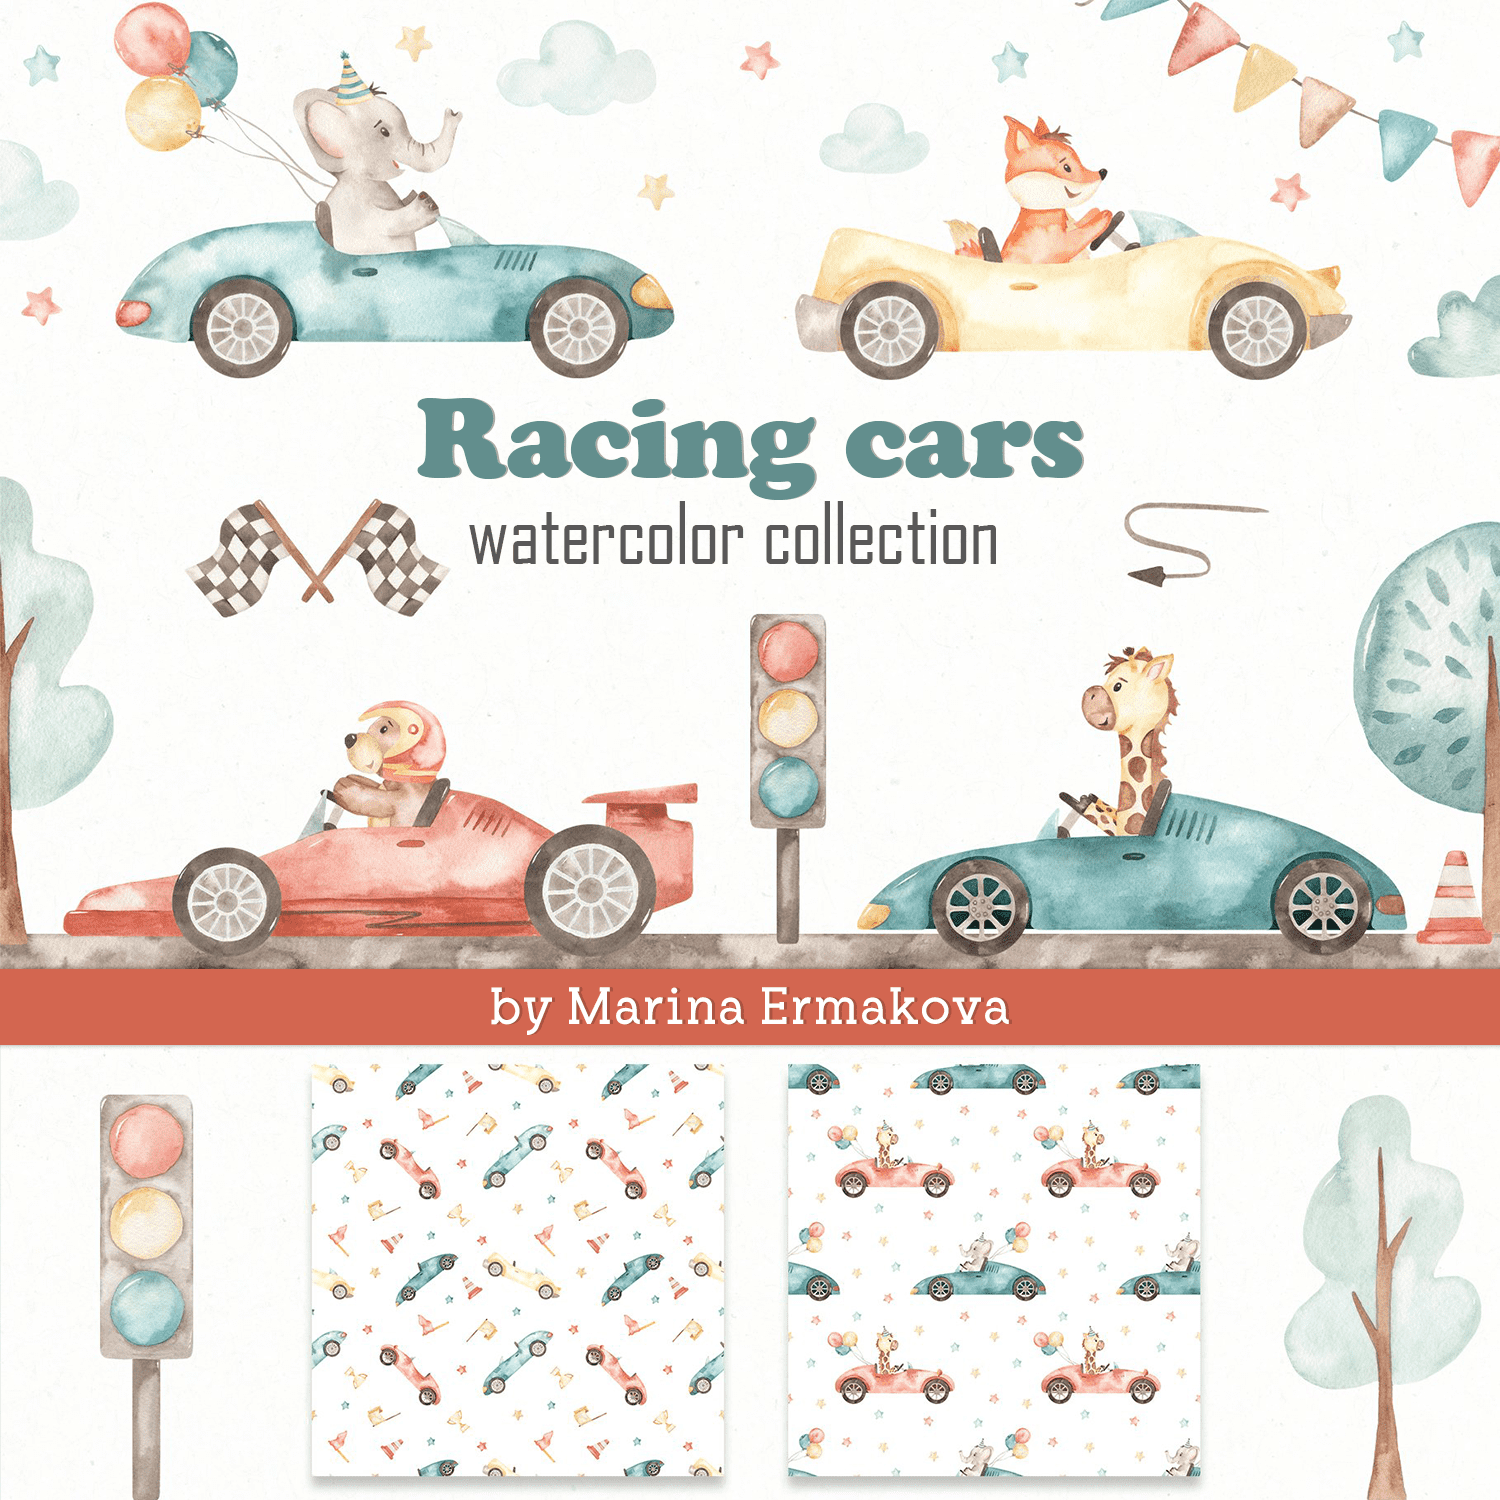 Racing cars watercolor collection.